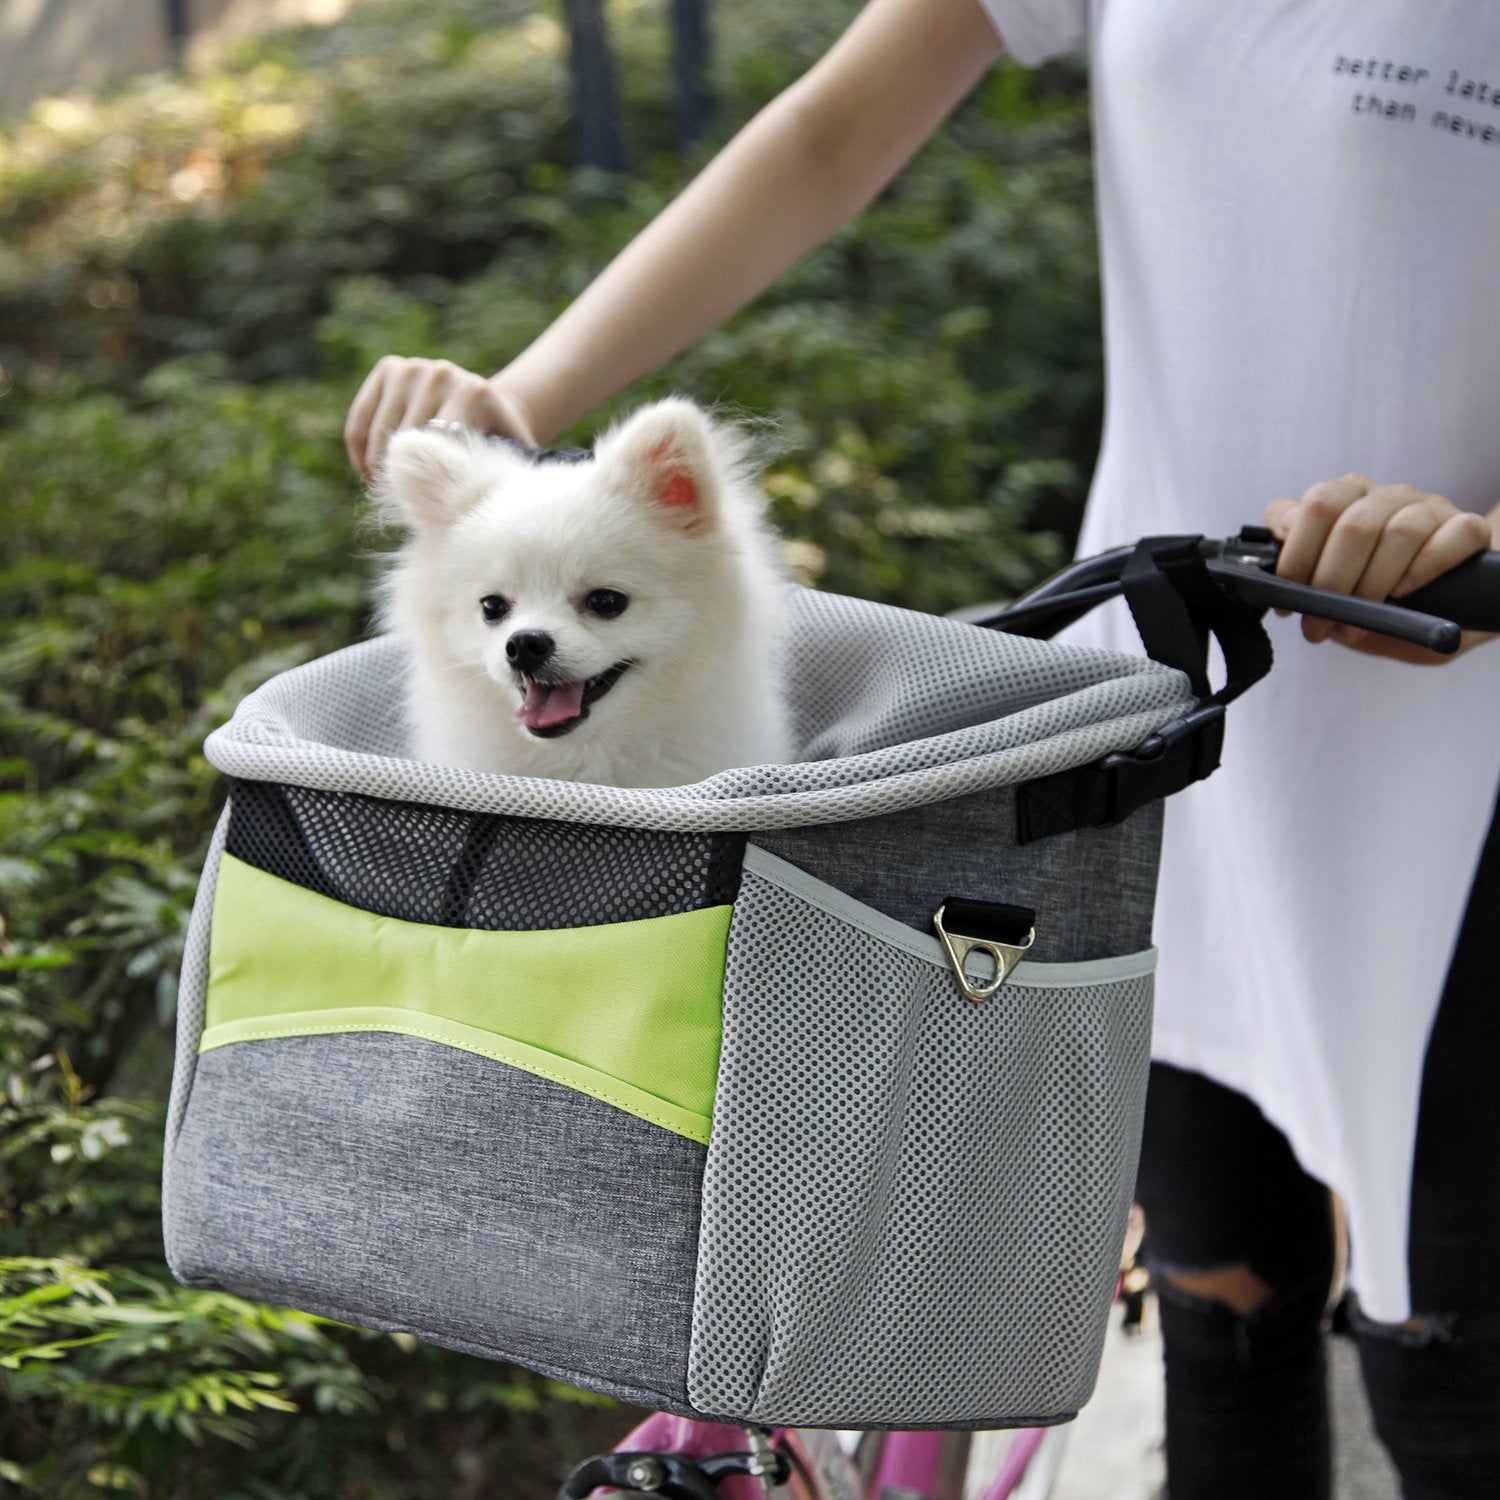 This bicycle handlebar dog basket is designed to carry a small dog on a bicycle and easily attaches to the handlebars to provide a safe and secure place for a dog to sit while riding.